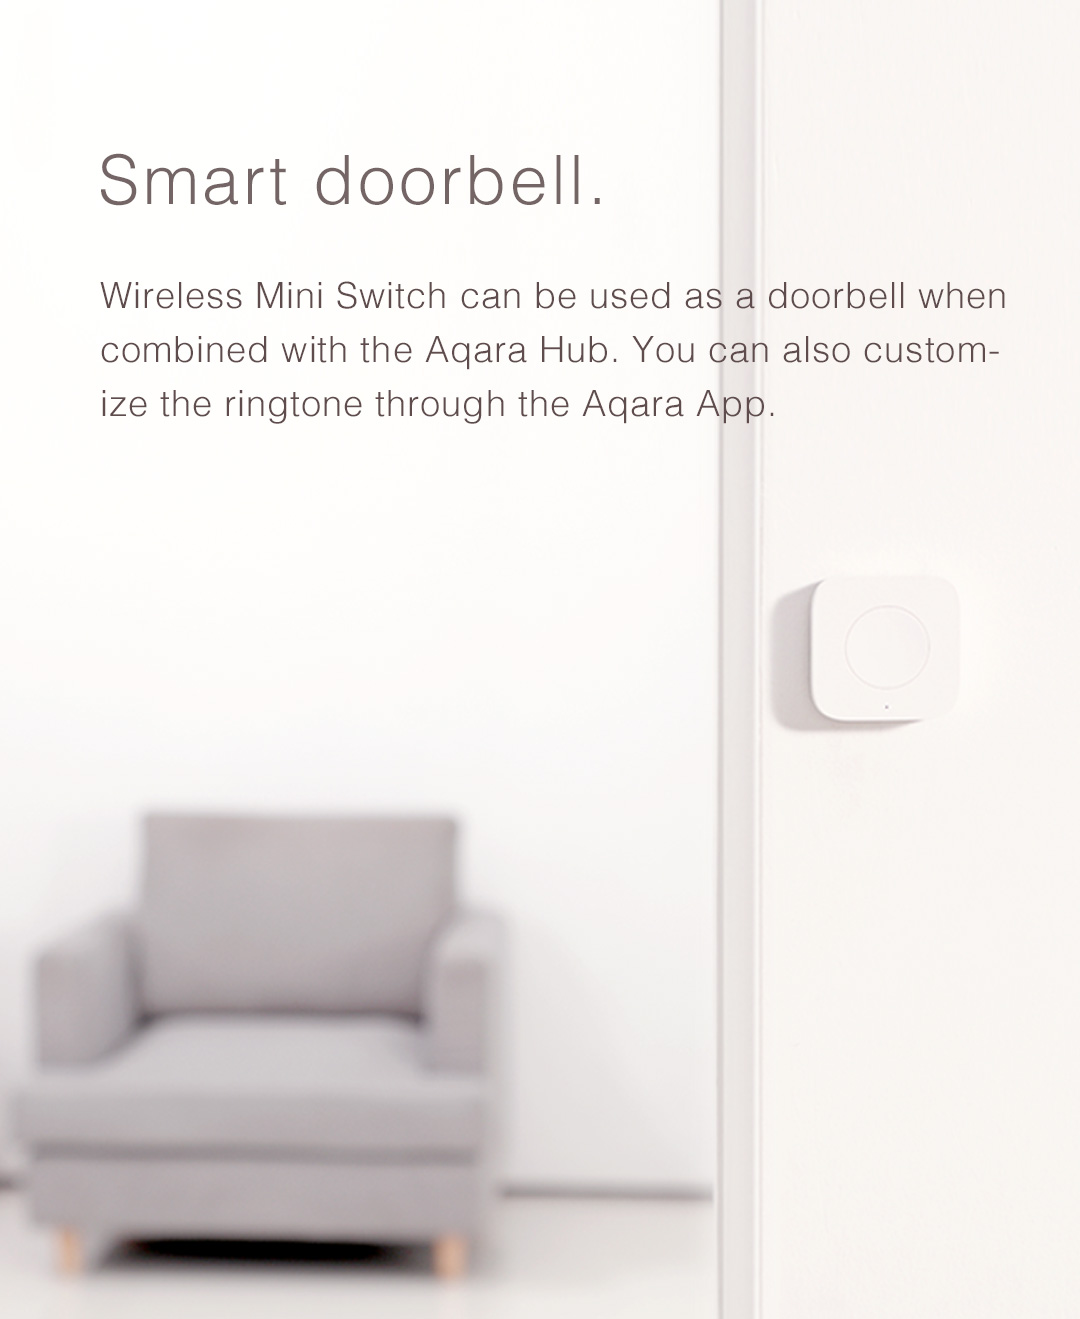 wireless remote switch can serve as a doorbell with Aqara hub